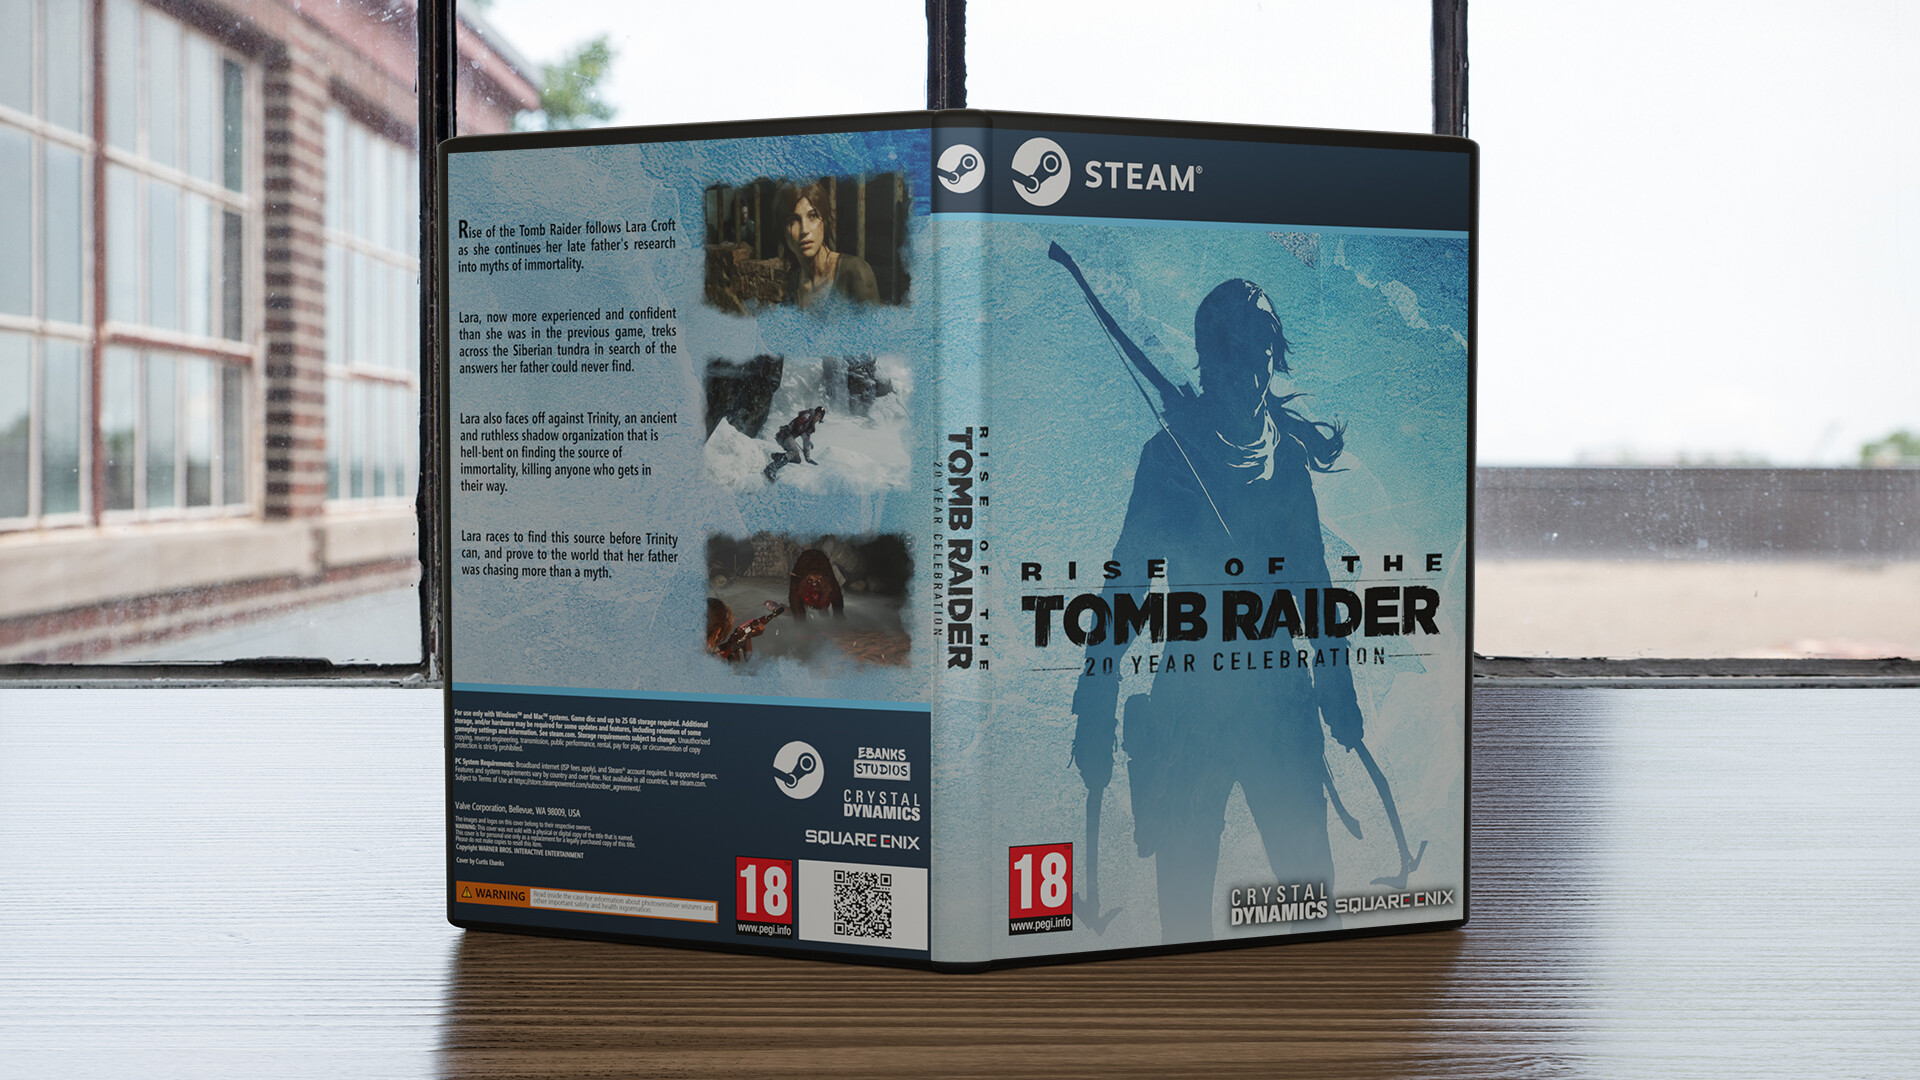 Rise of the tomb raider 20 years celebration steam фото 36